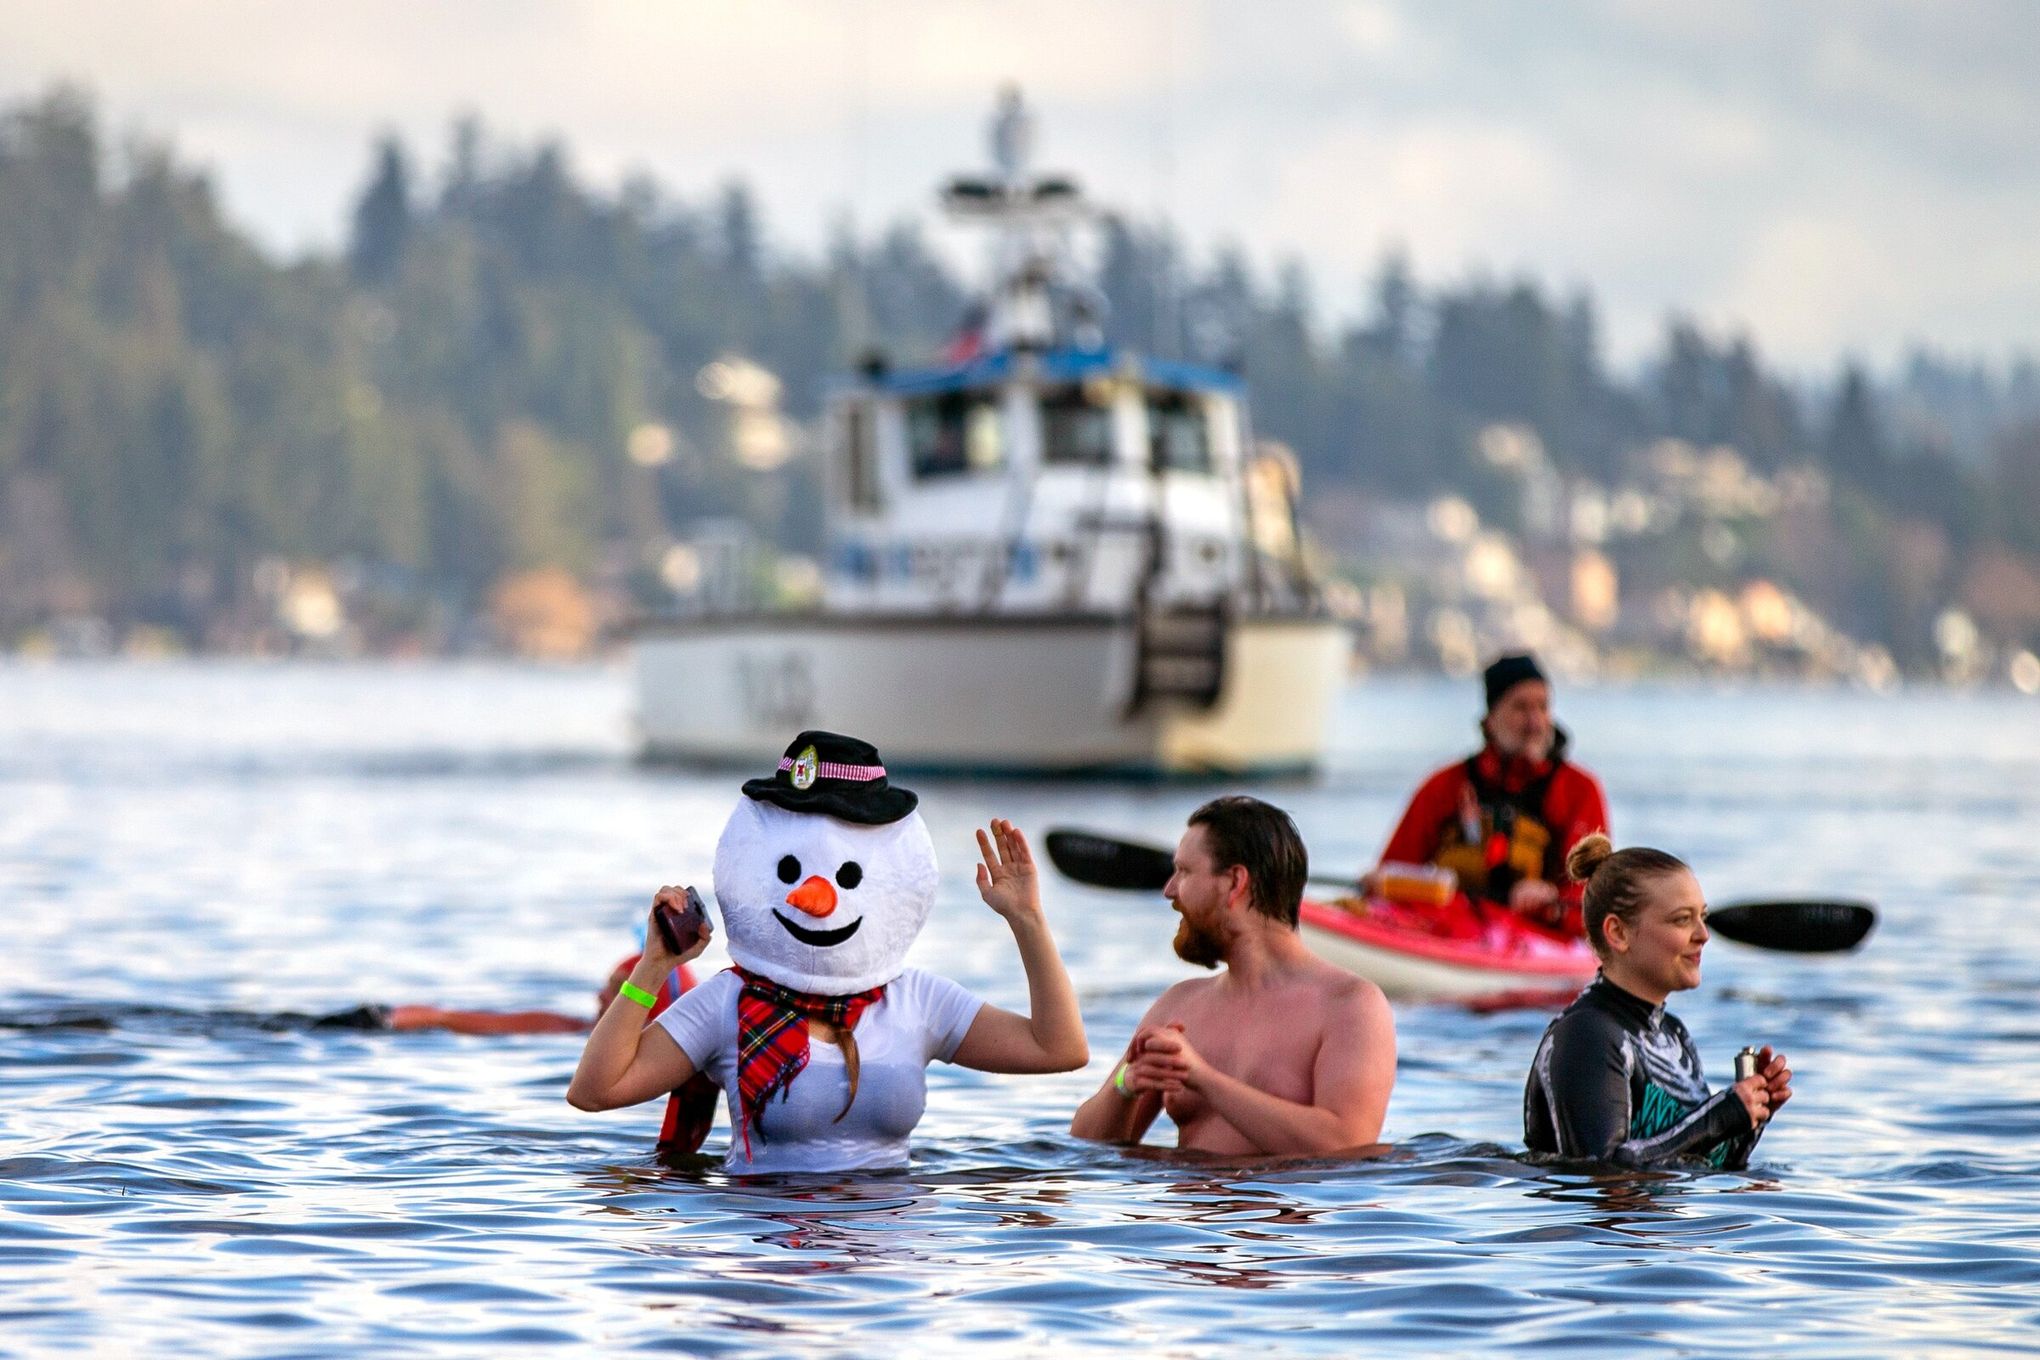 Plunge into the New Year at Point Defiance Marina - Metro Parks Tacoma